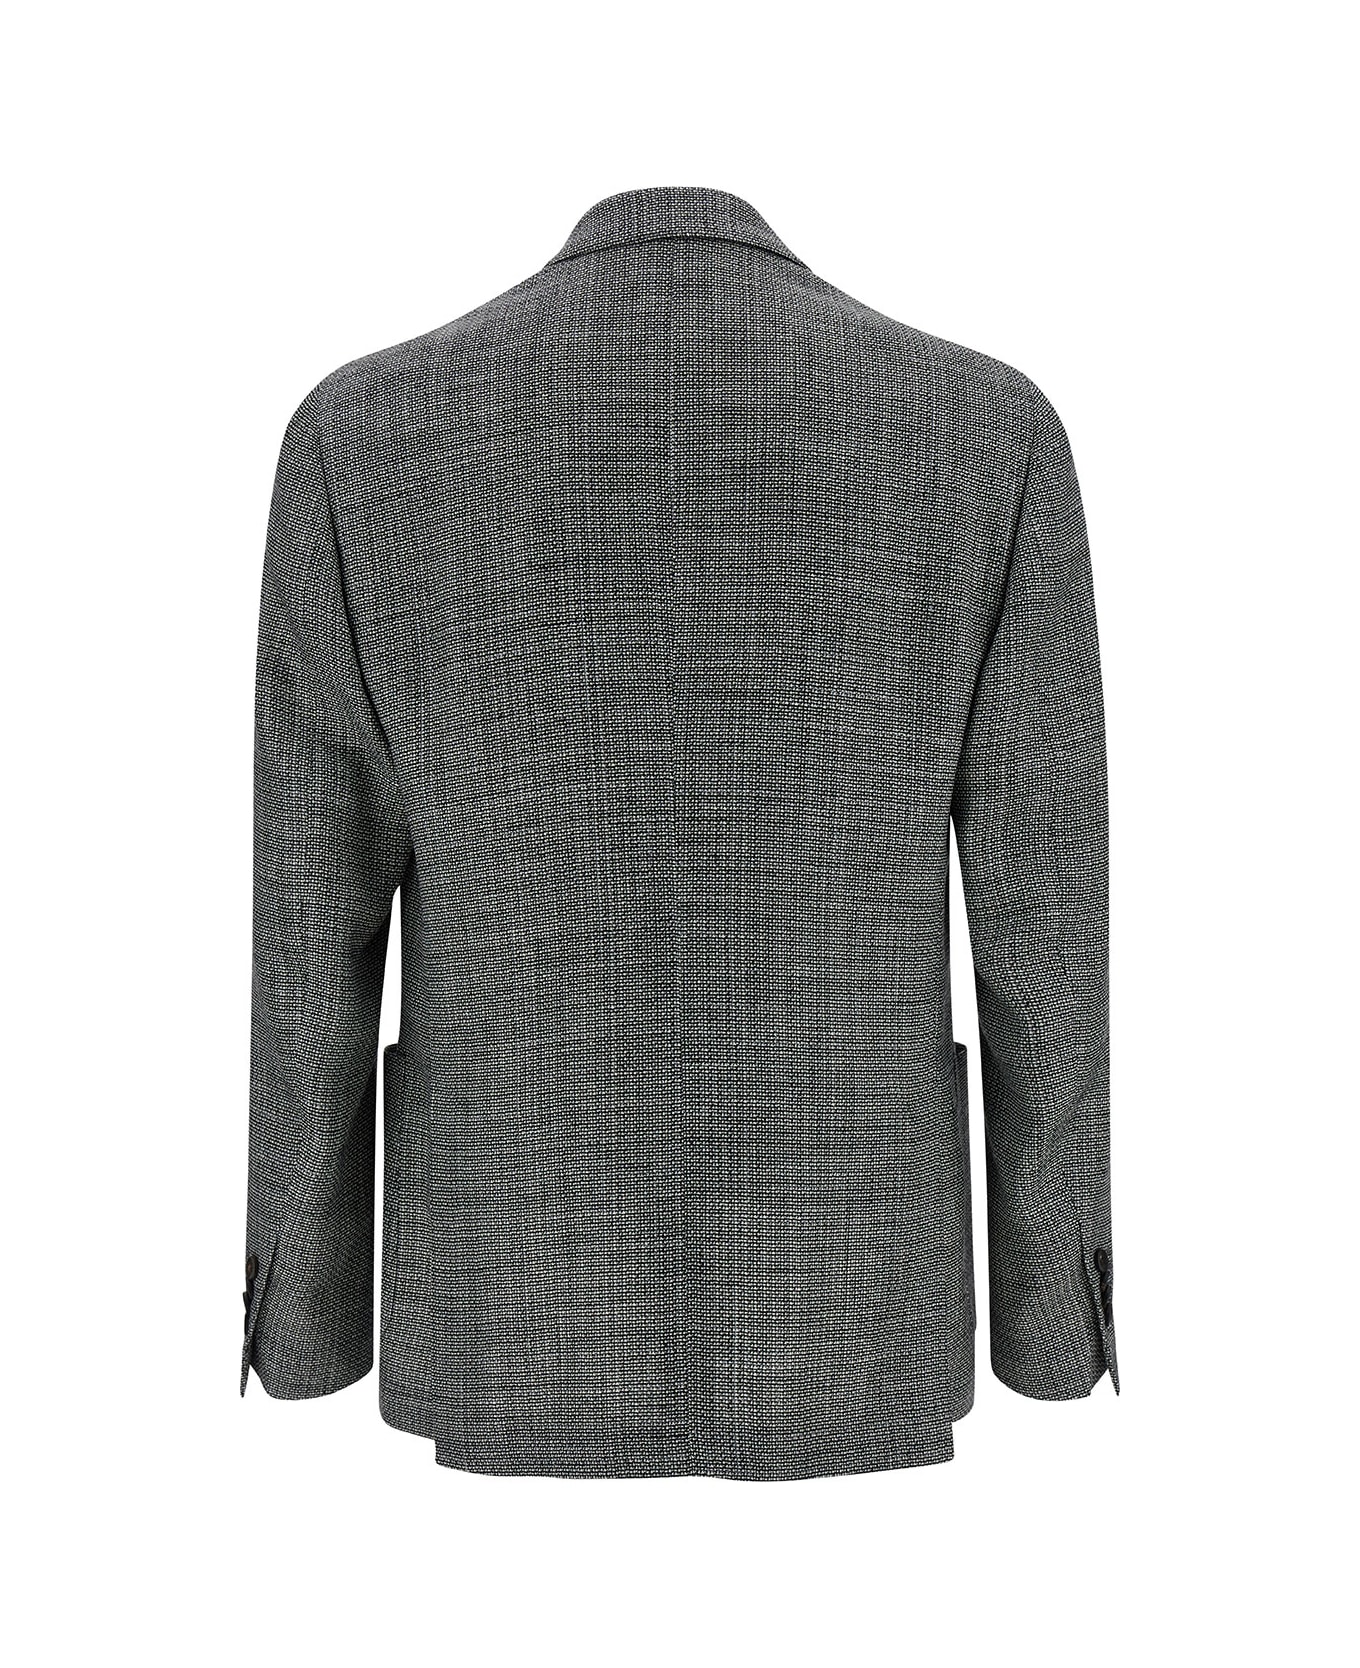 Lardini Grey Double-breasted Blazer With Buttons In Wool Blend Man - White/black